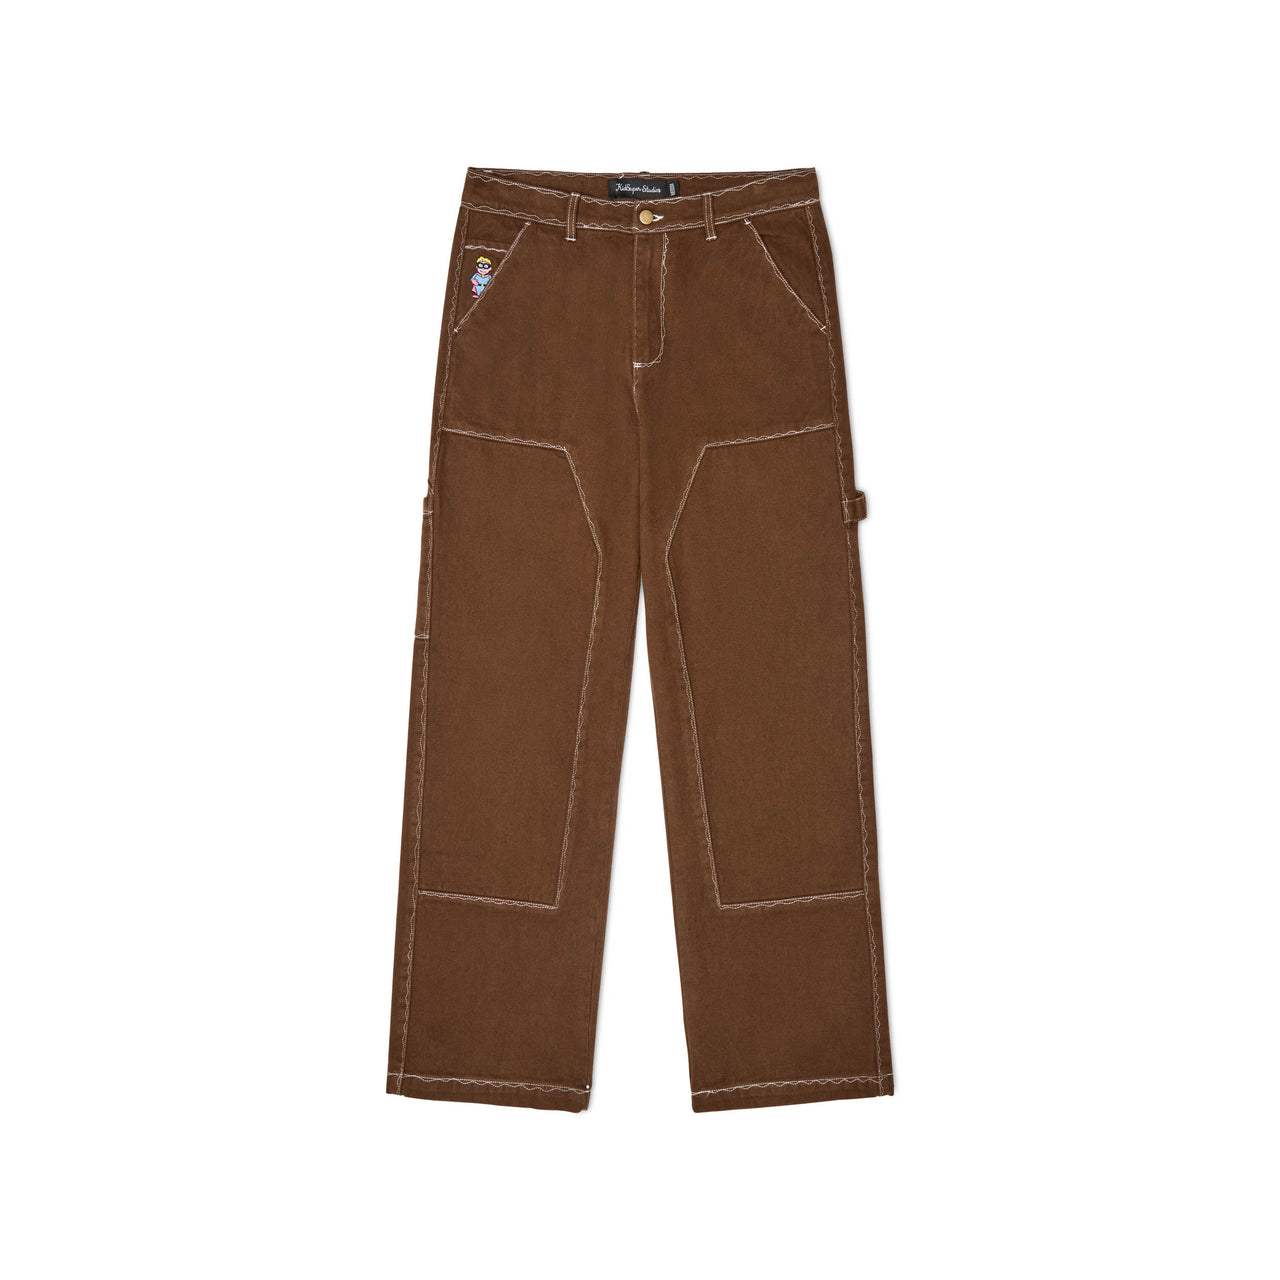 messy stitched work pants [Brown]